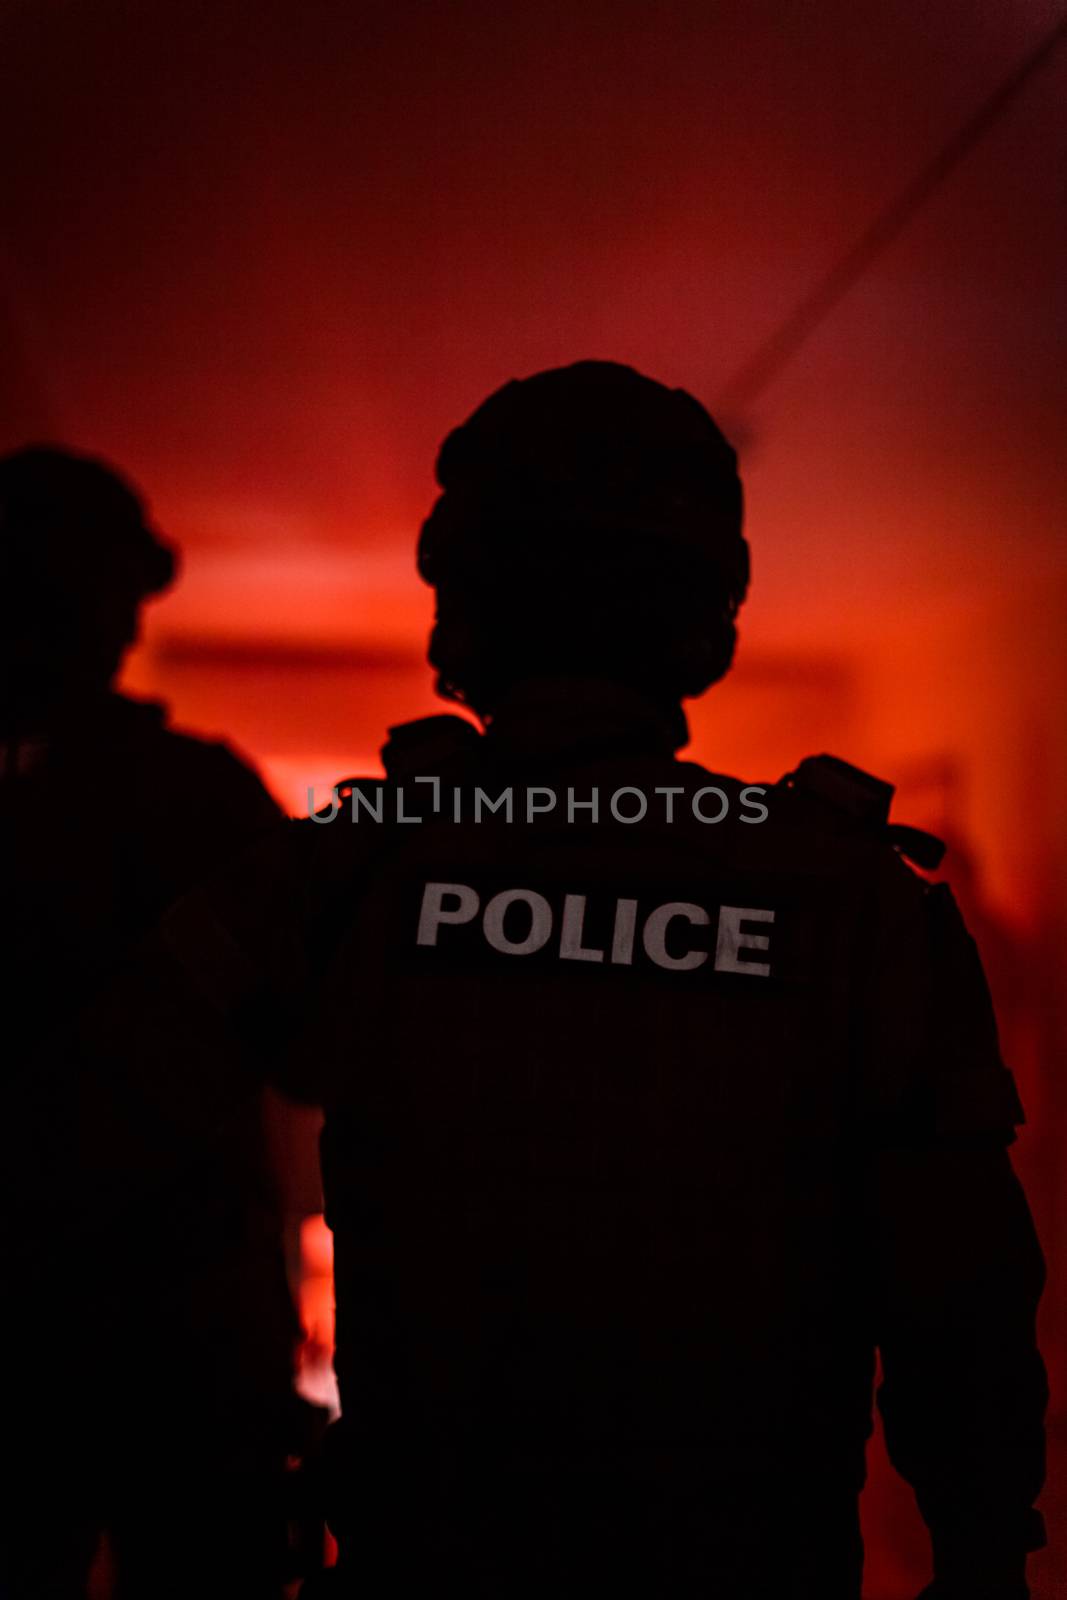 Silhouette of a police officer. Police commando in action, arresting the perpetrator in the building.